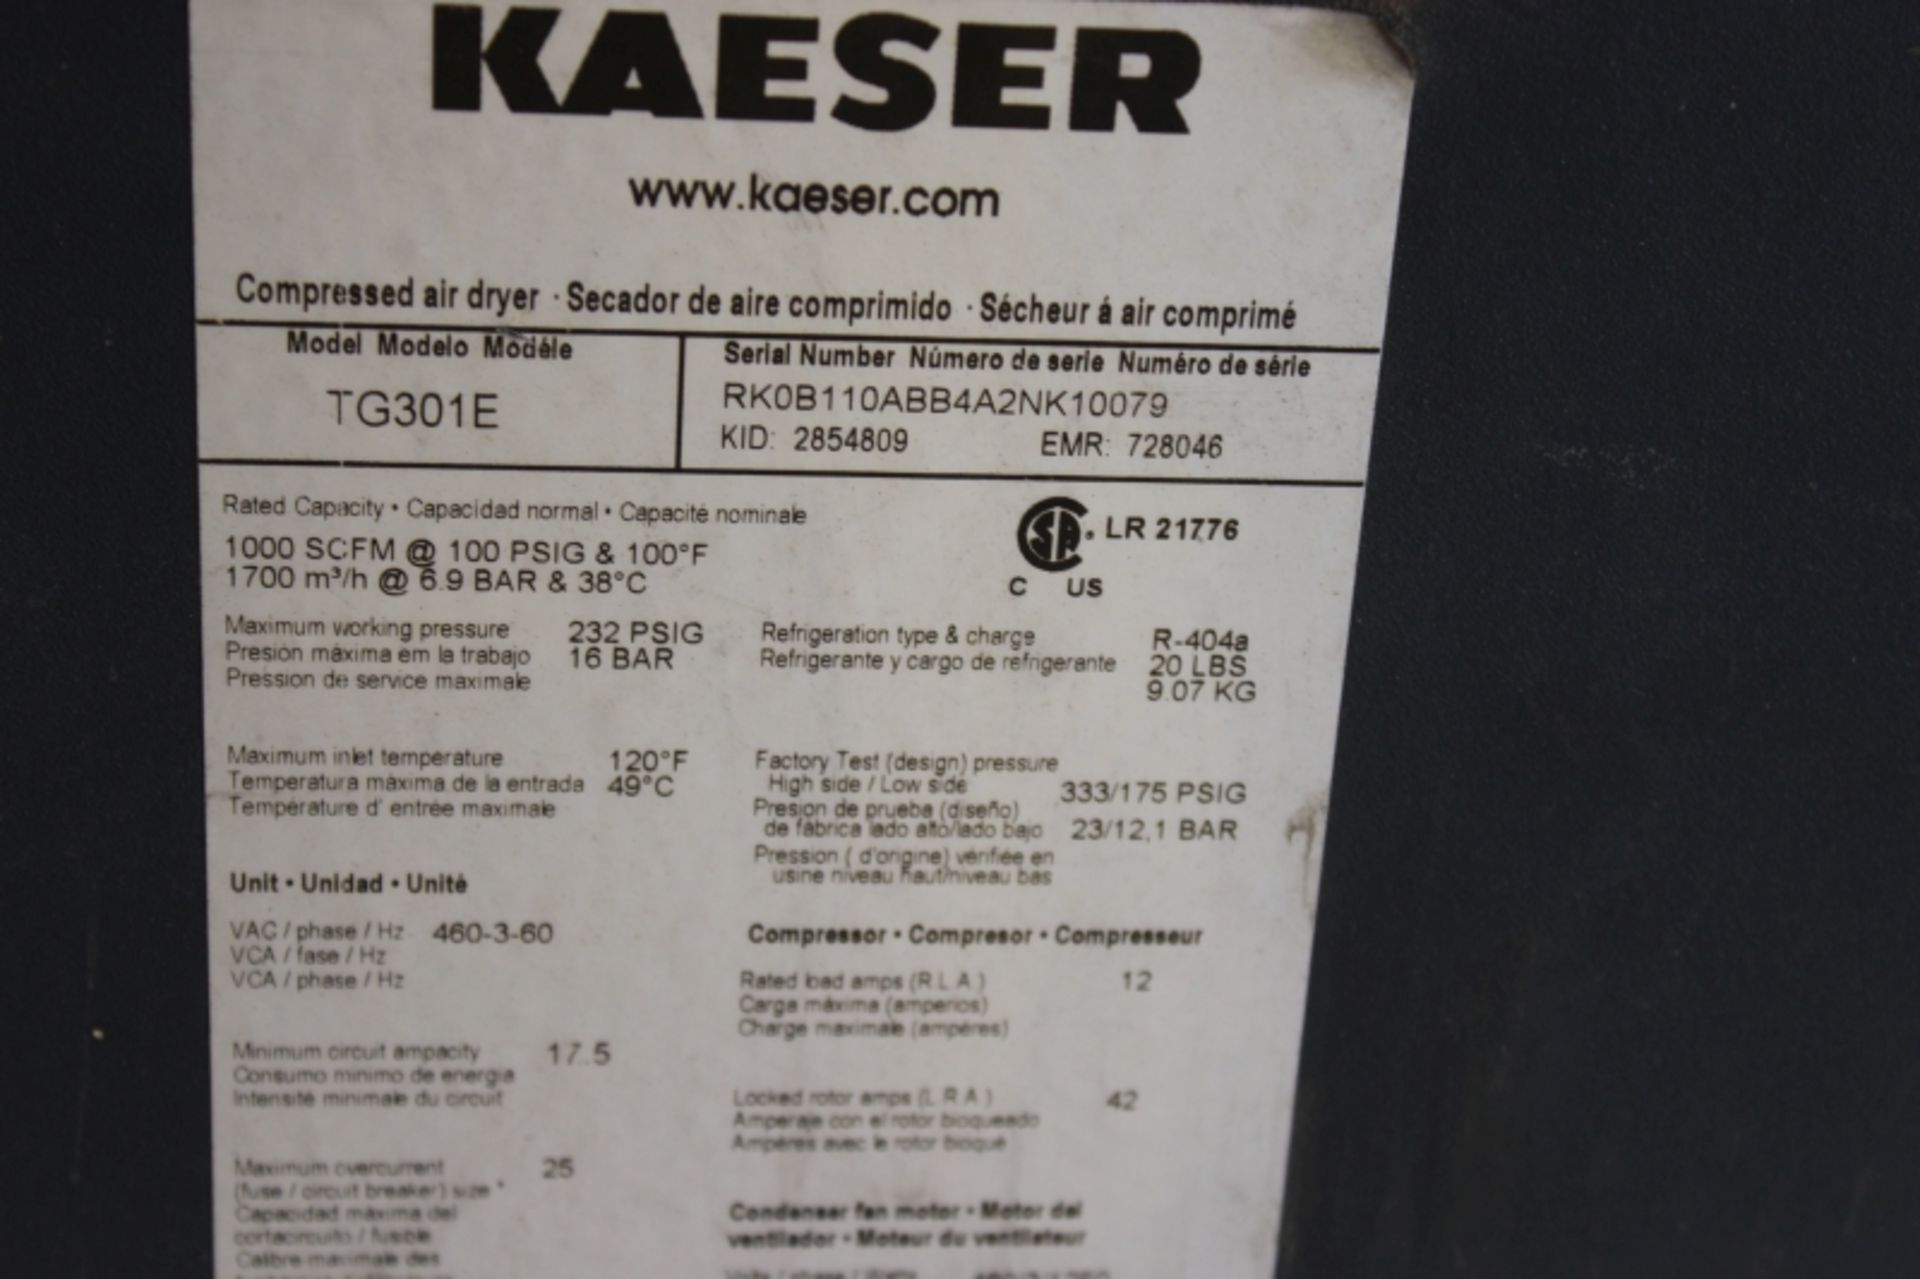 Kaeser TG301E Refrigerated Air Dryer, s/n RK0B110ABB4a2NK10079 - Image 3 of 3